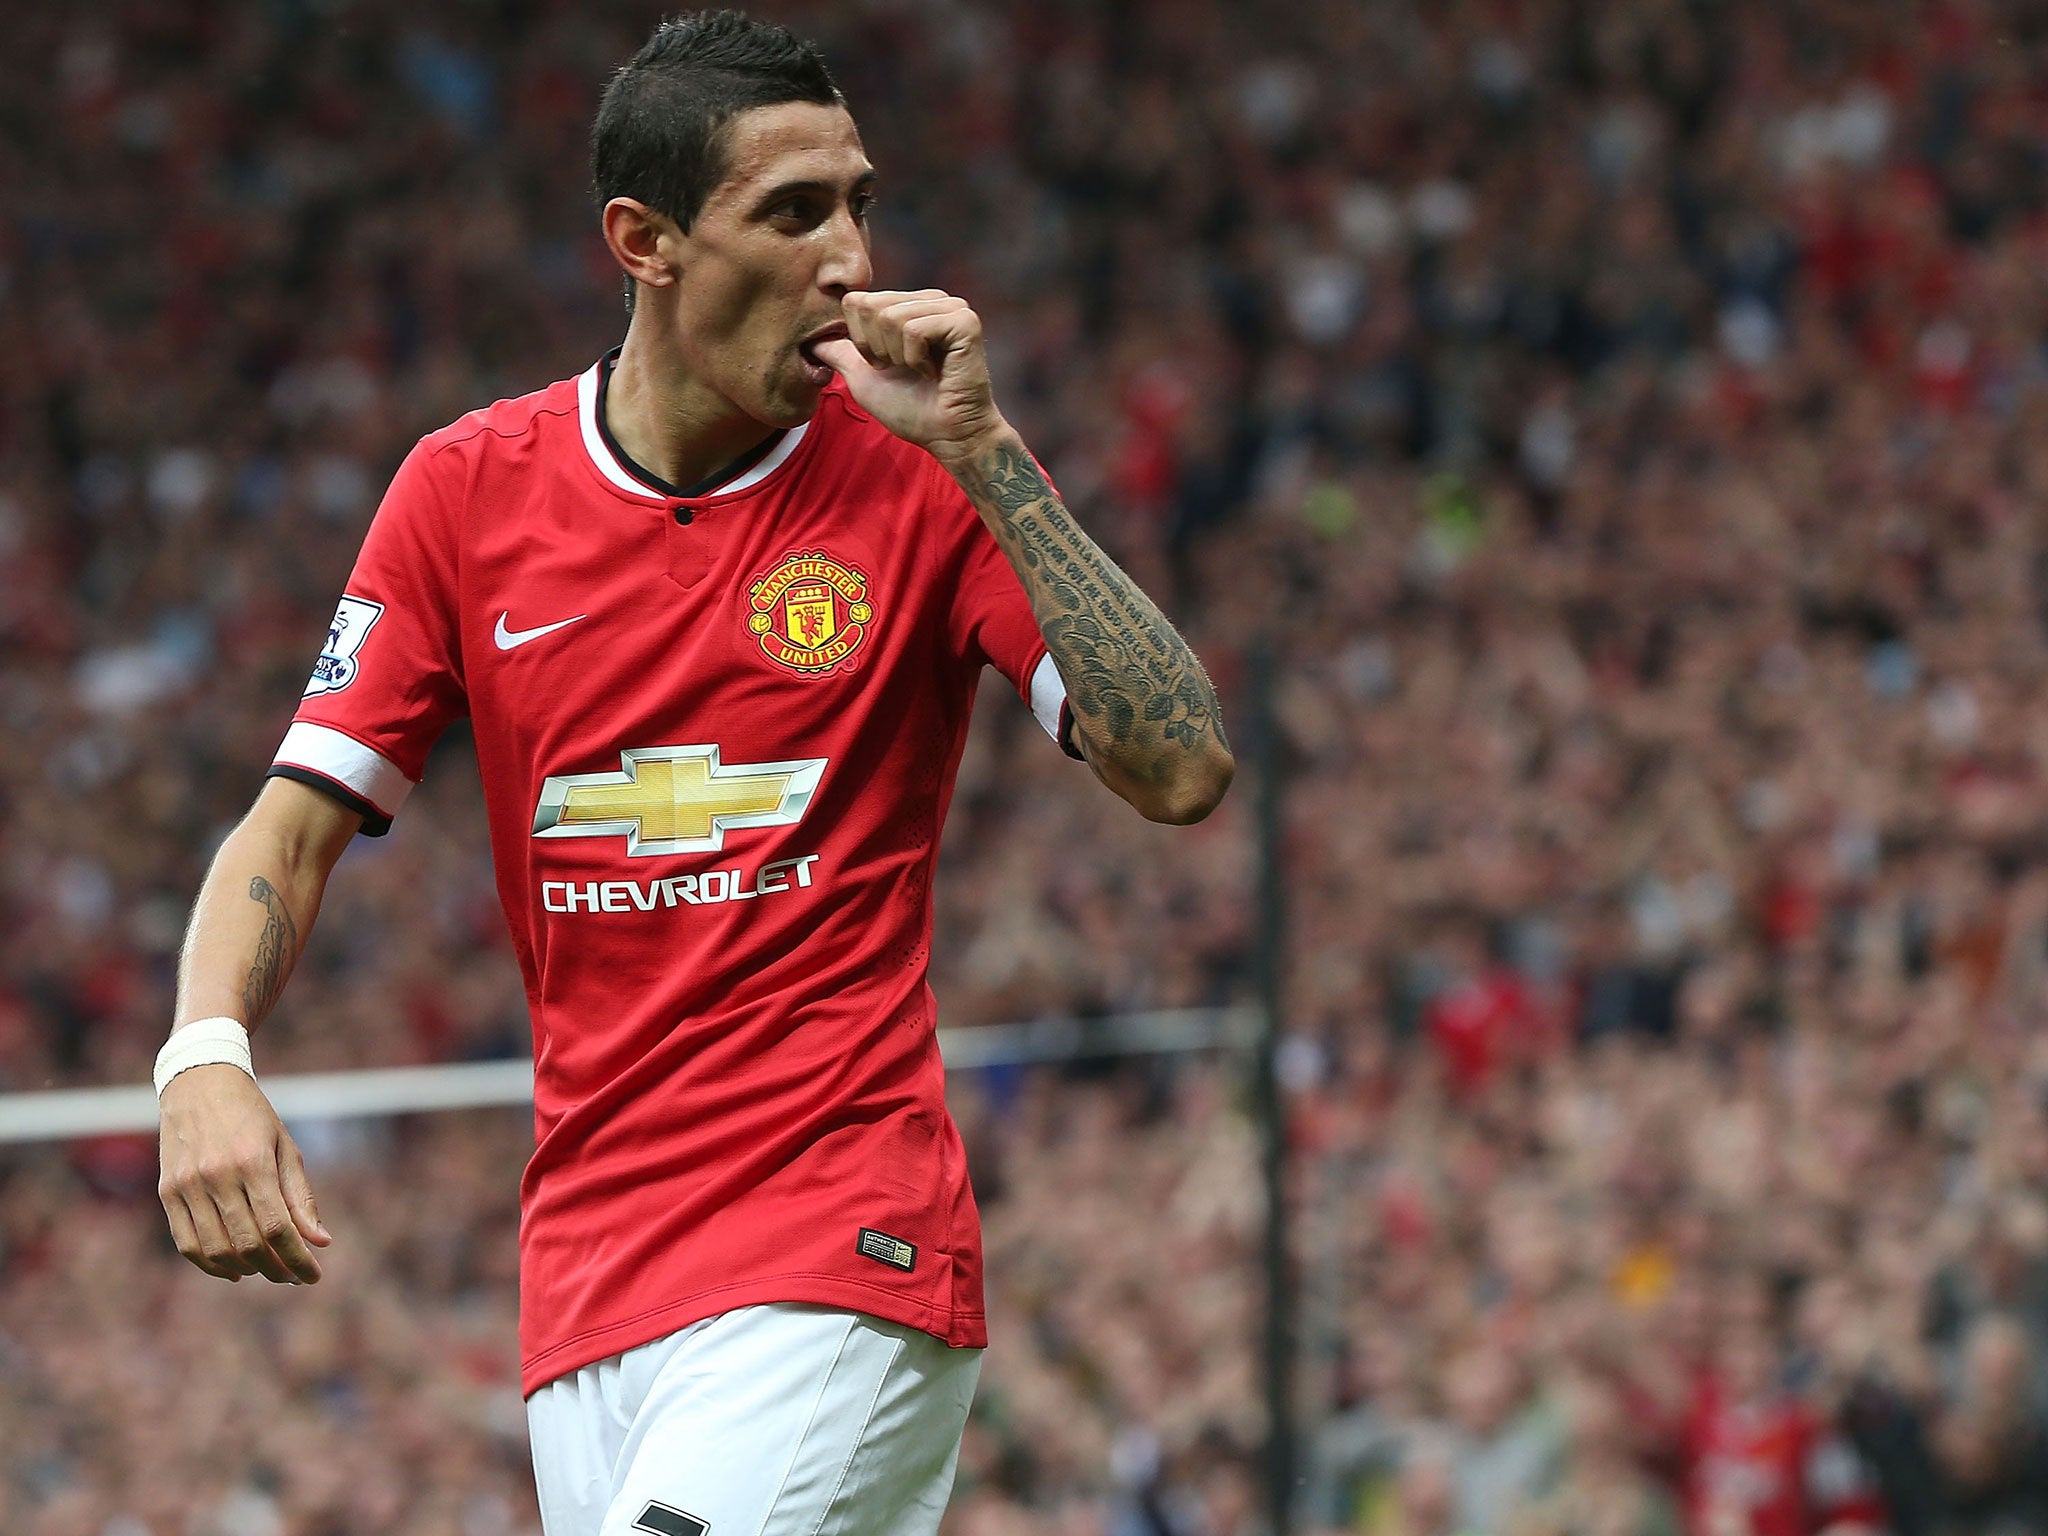 Angel Di Maria celebrates his first goal for Manchester United against QPR